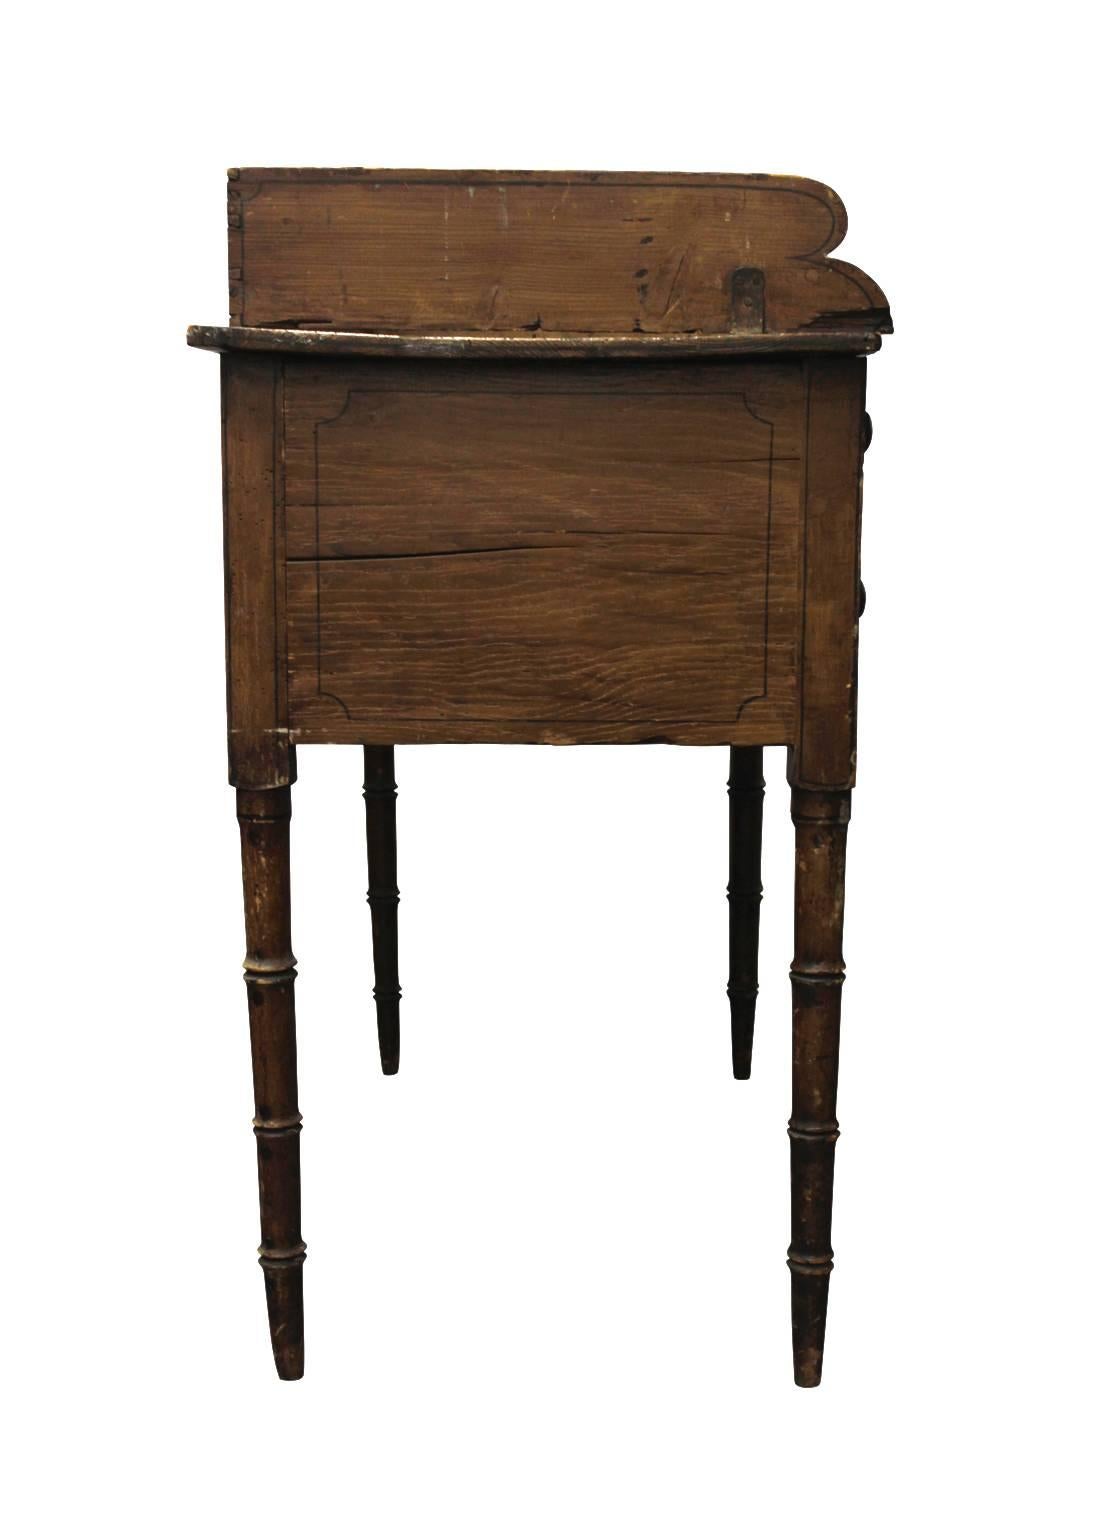 Country 19th Century English Painted Wood Writing Table For Sale